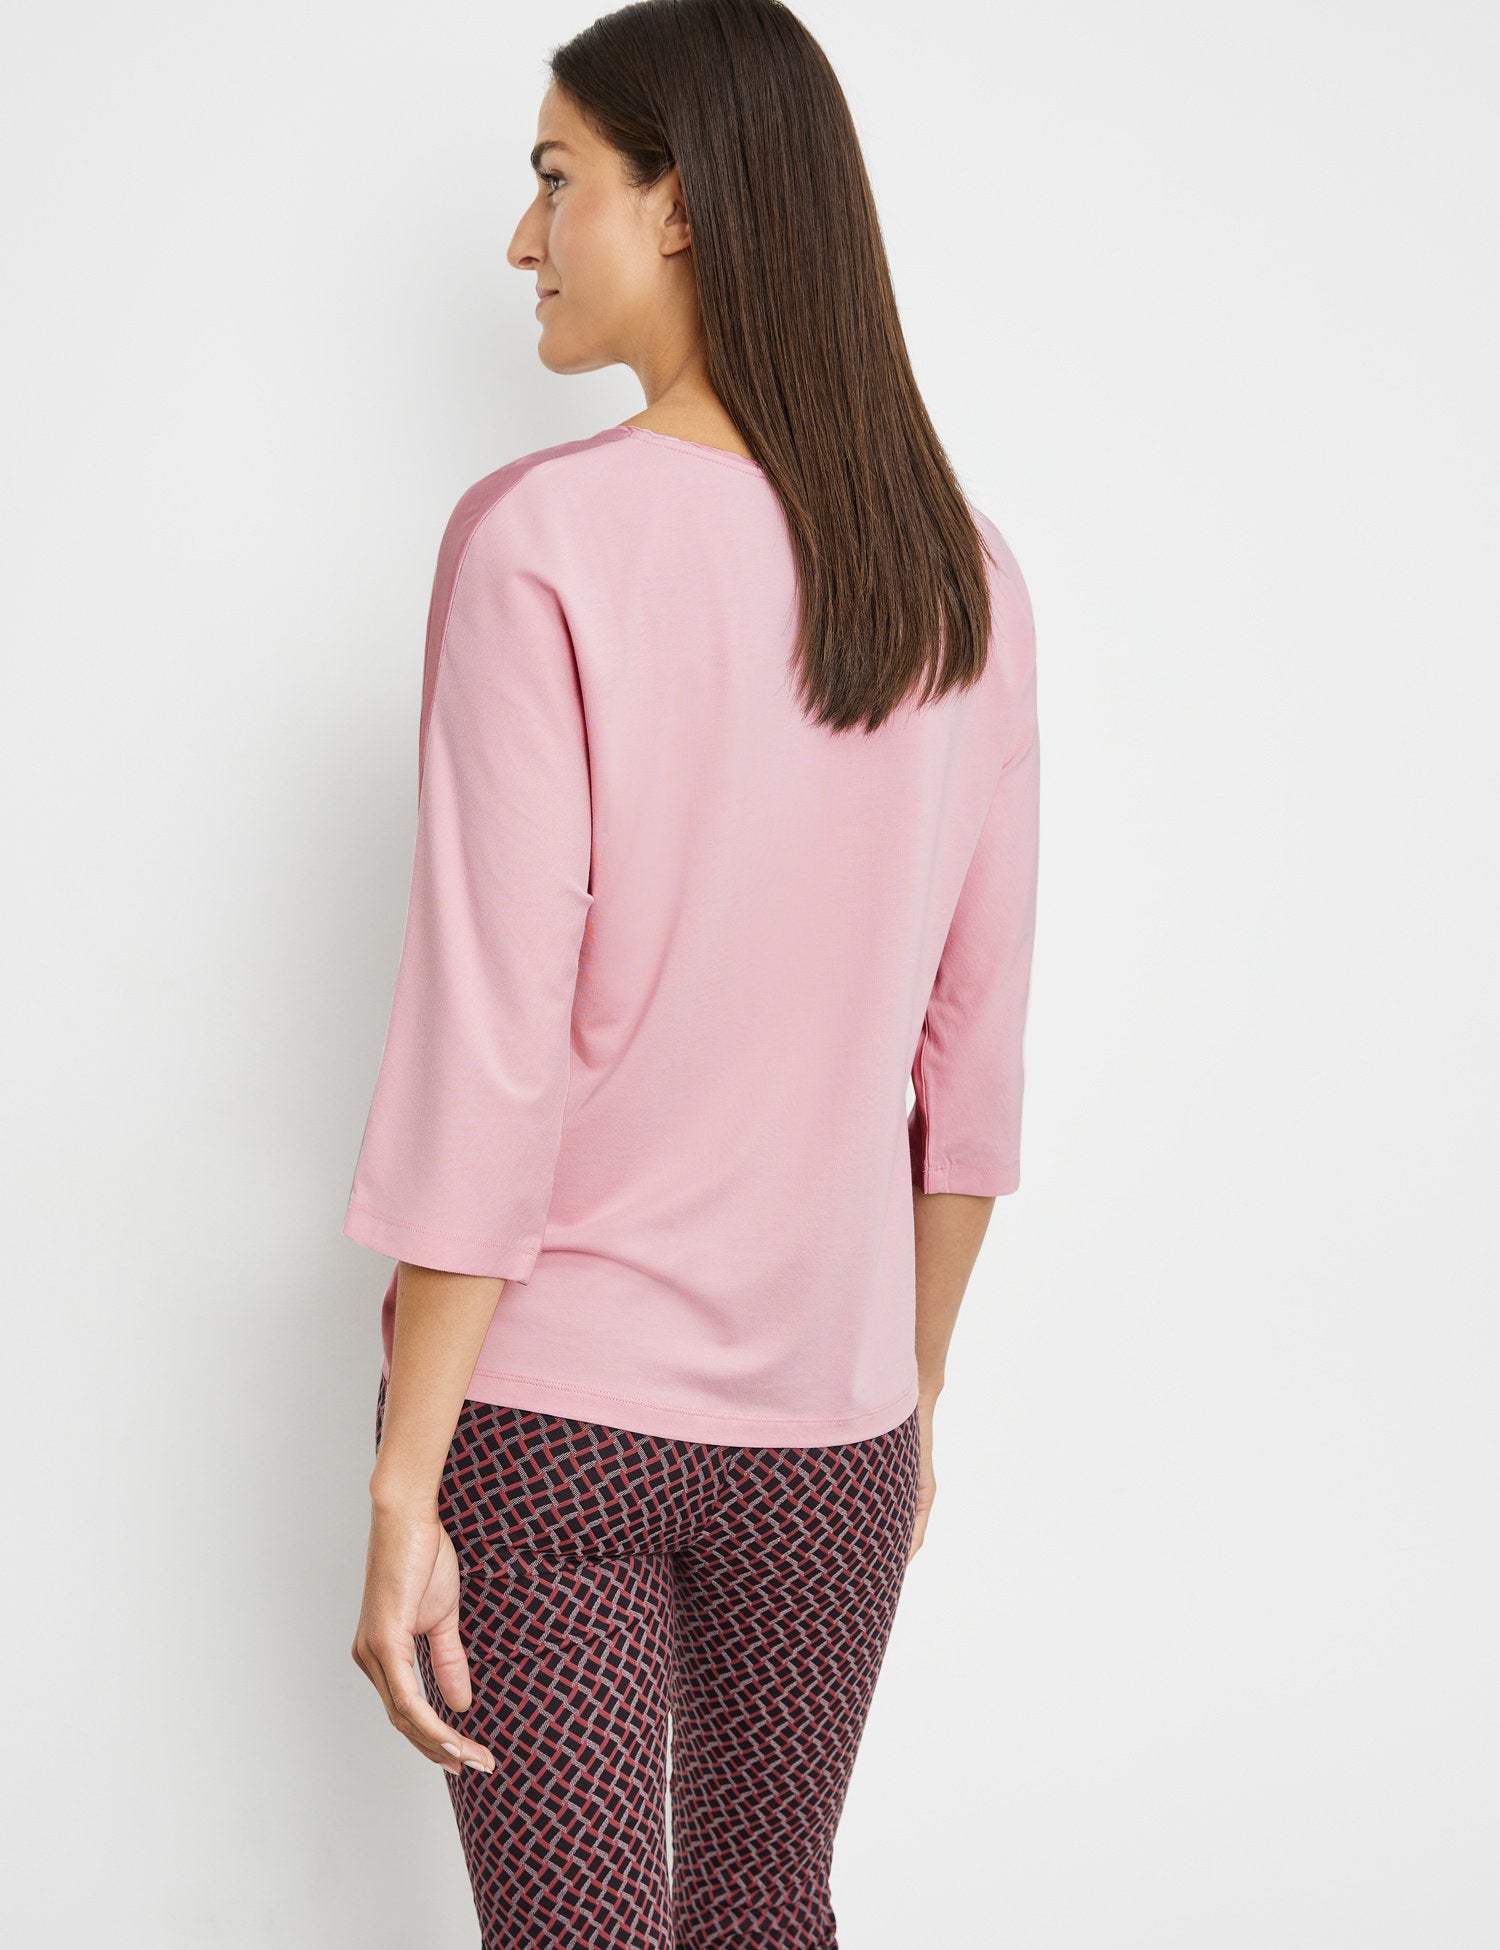 3/4 Sleeve Top With A Fabric Panel And A Subtle Sheen_270229-35033_30907_06